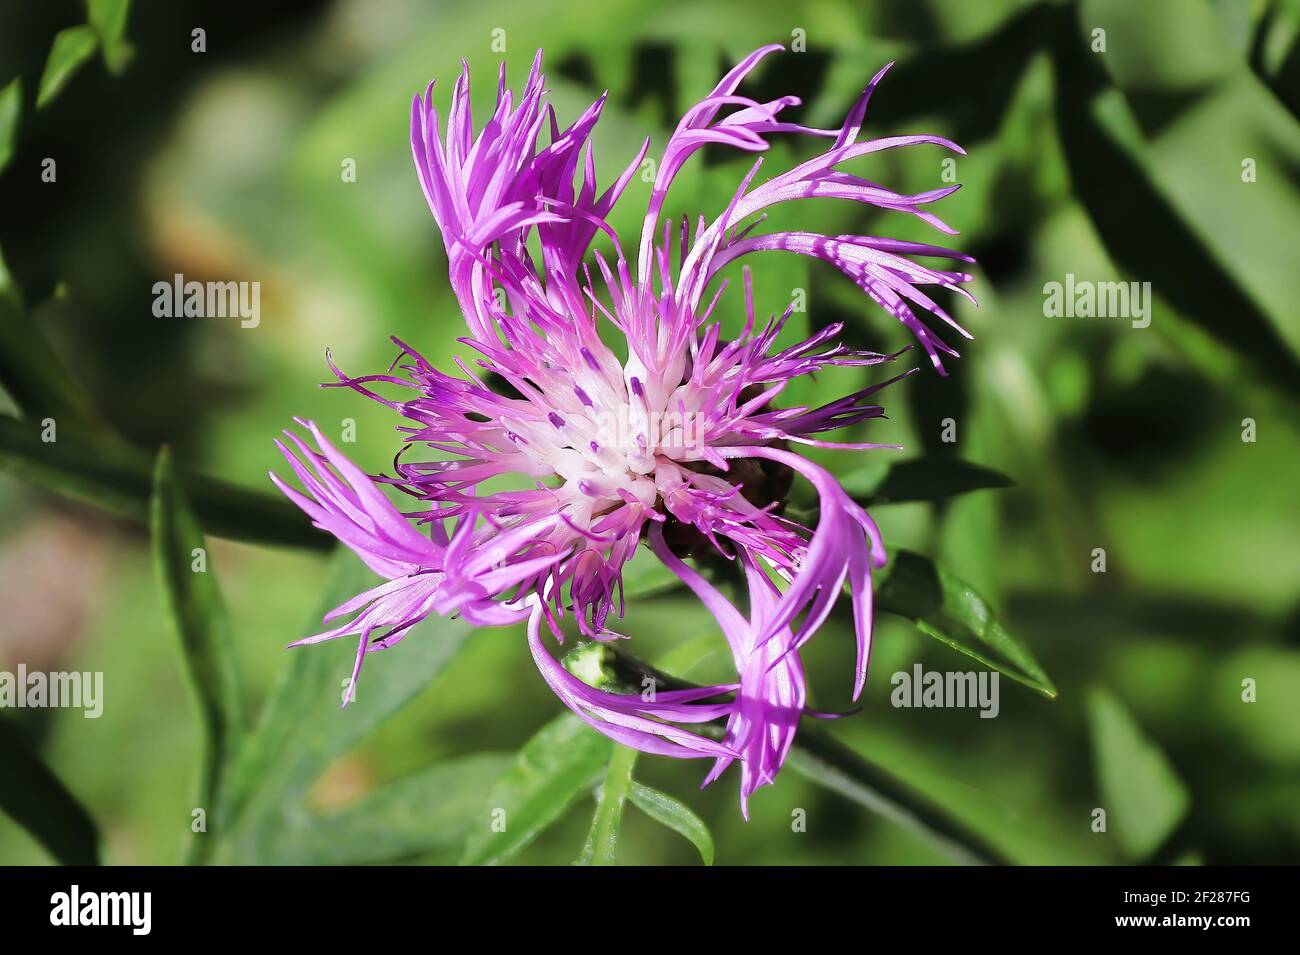 Spiraled pink petals on a knapweed flower Stock Photo